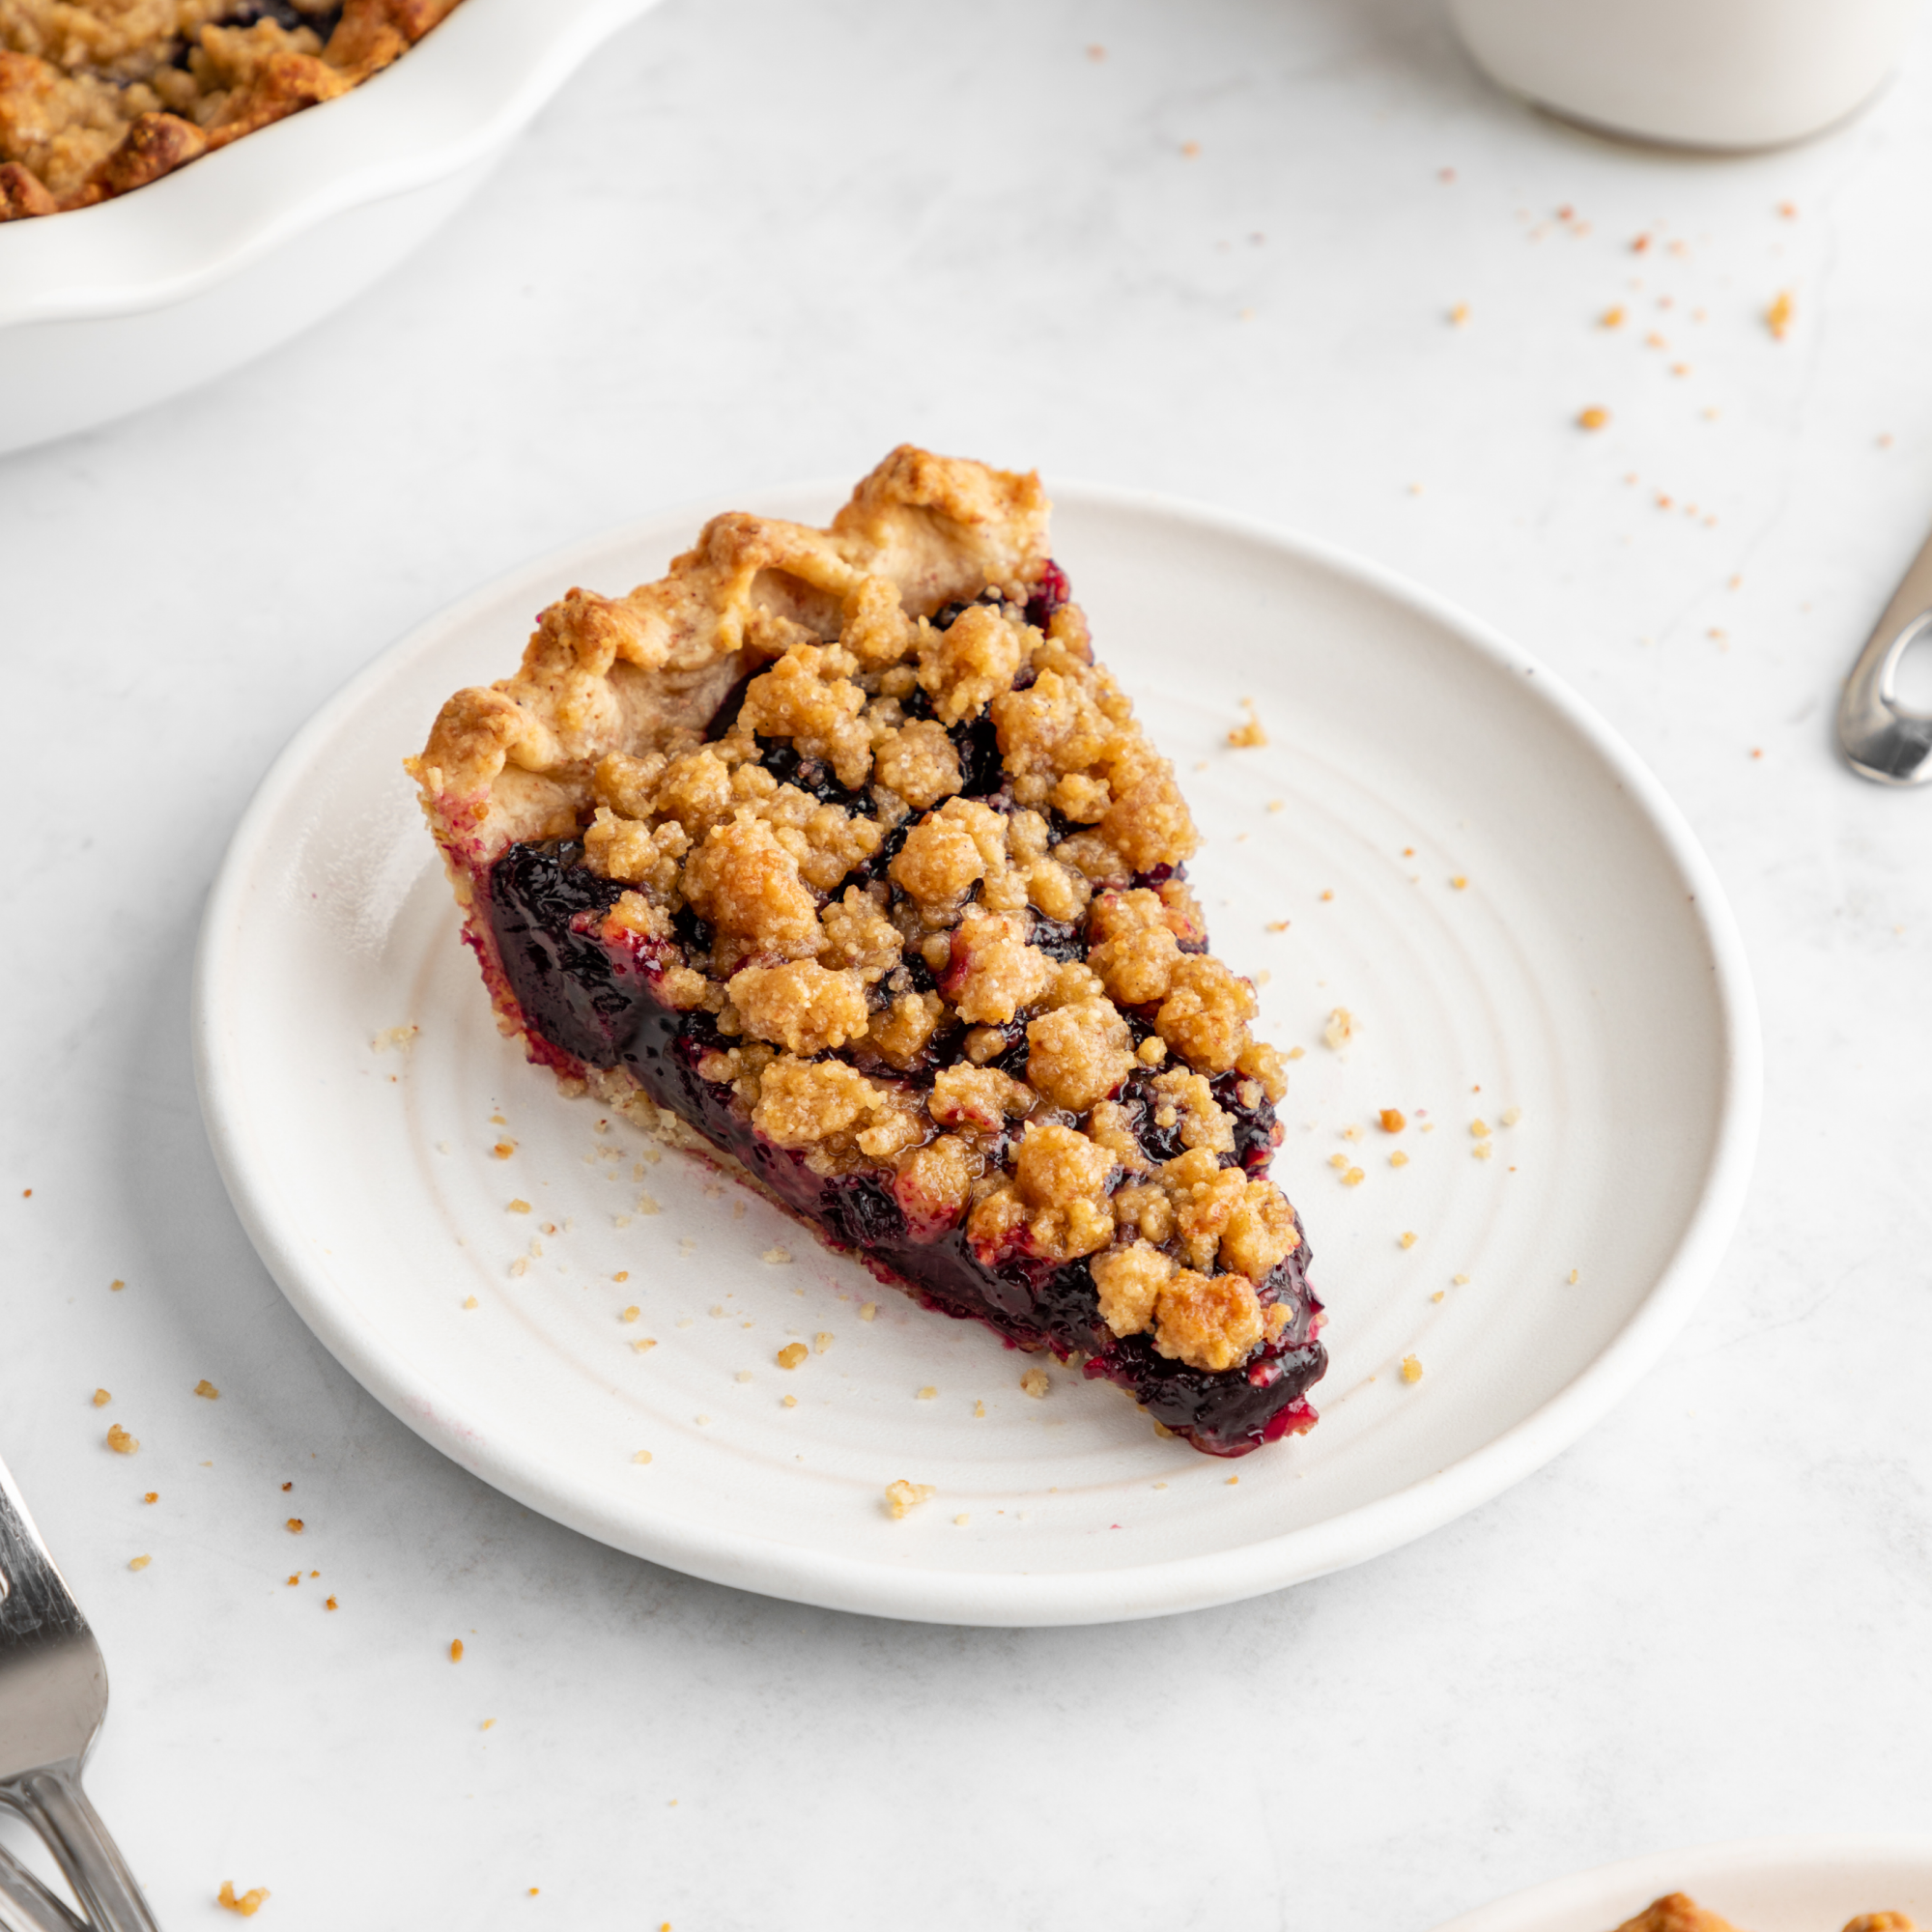 Cherry Crumble Pie made with leftover almond pulp from making almond milk in the Almond Cow